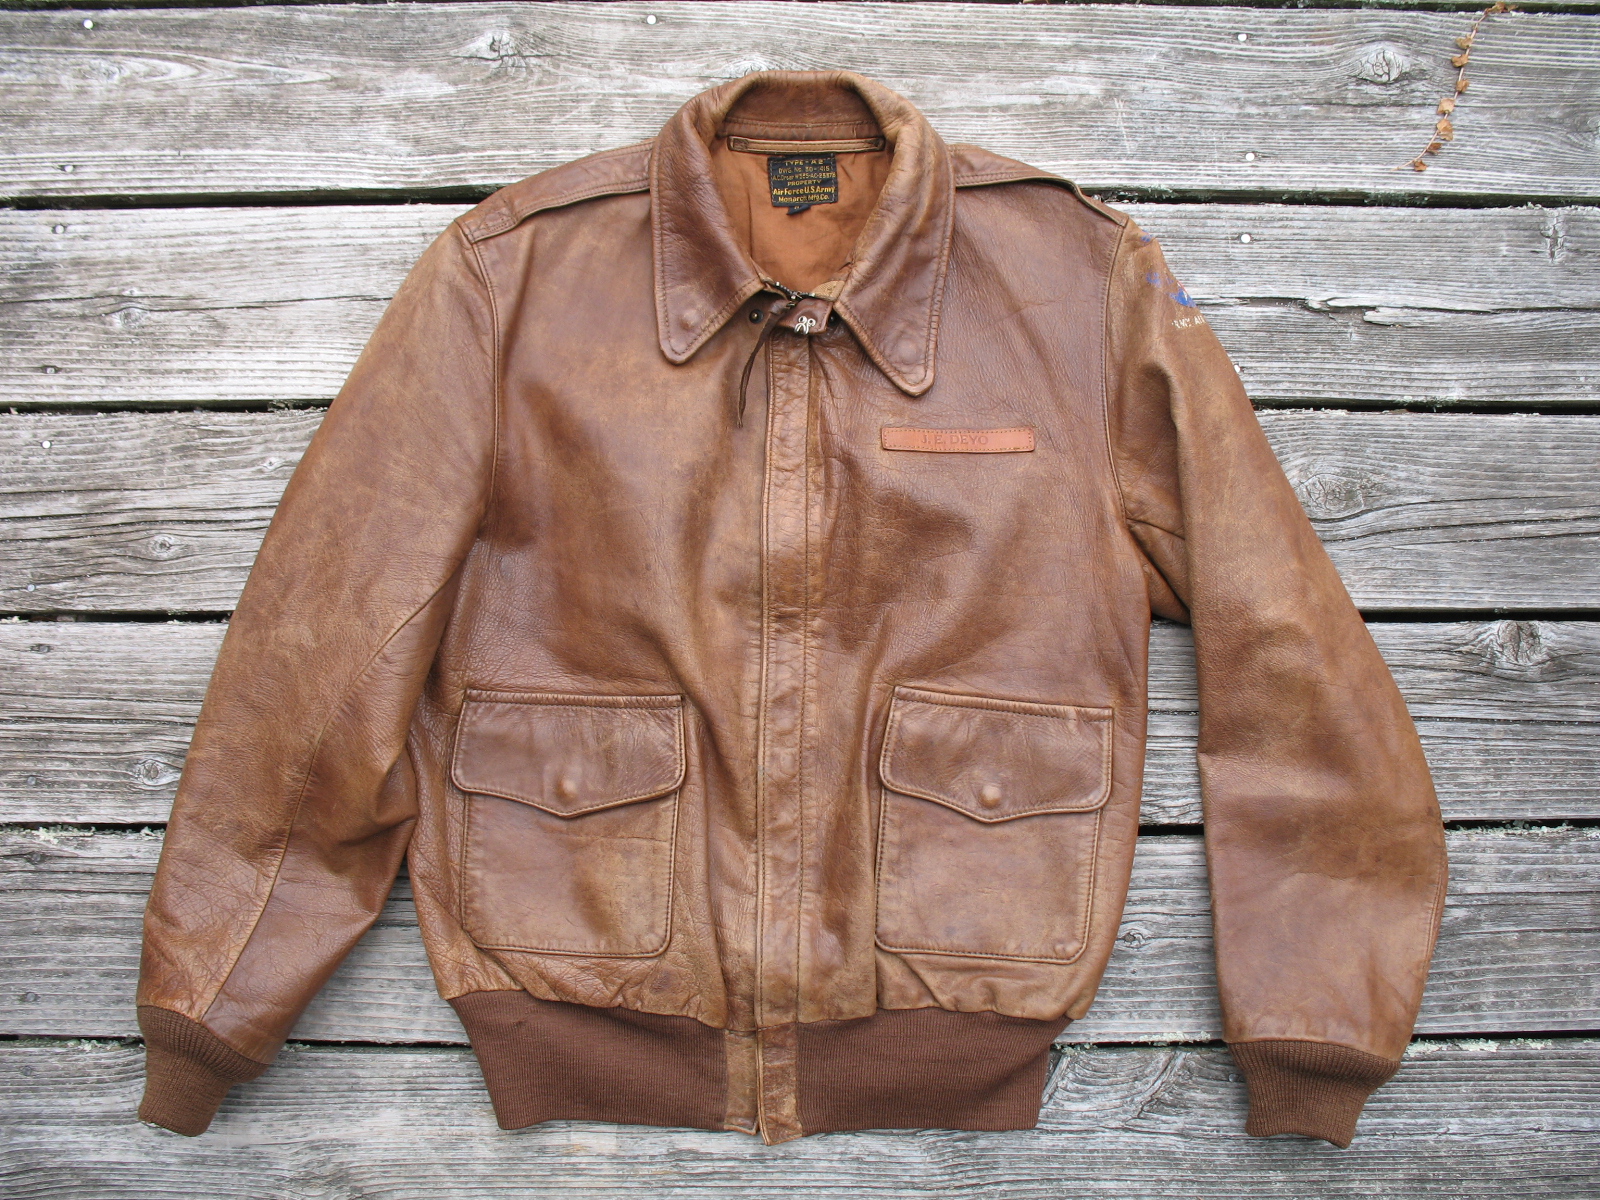 Any opinions on what this one is? | Page 2 | Vintage Leather Jackets Forum